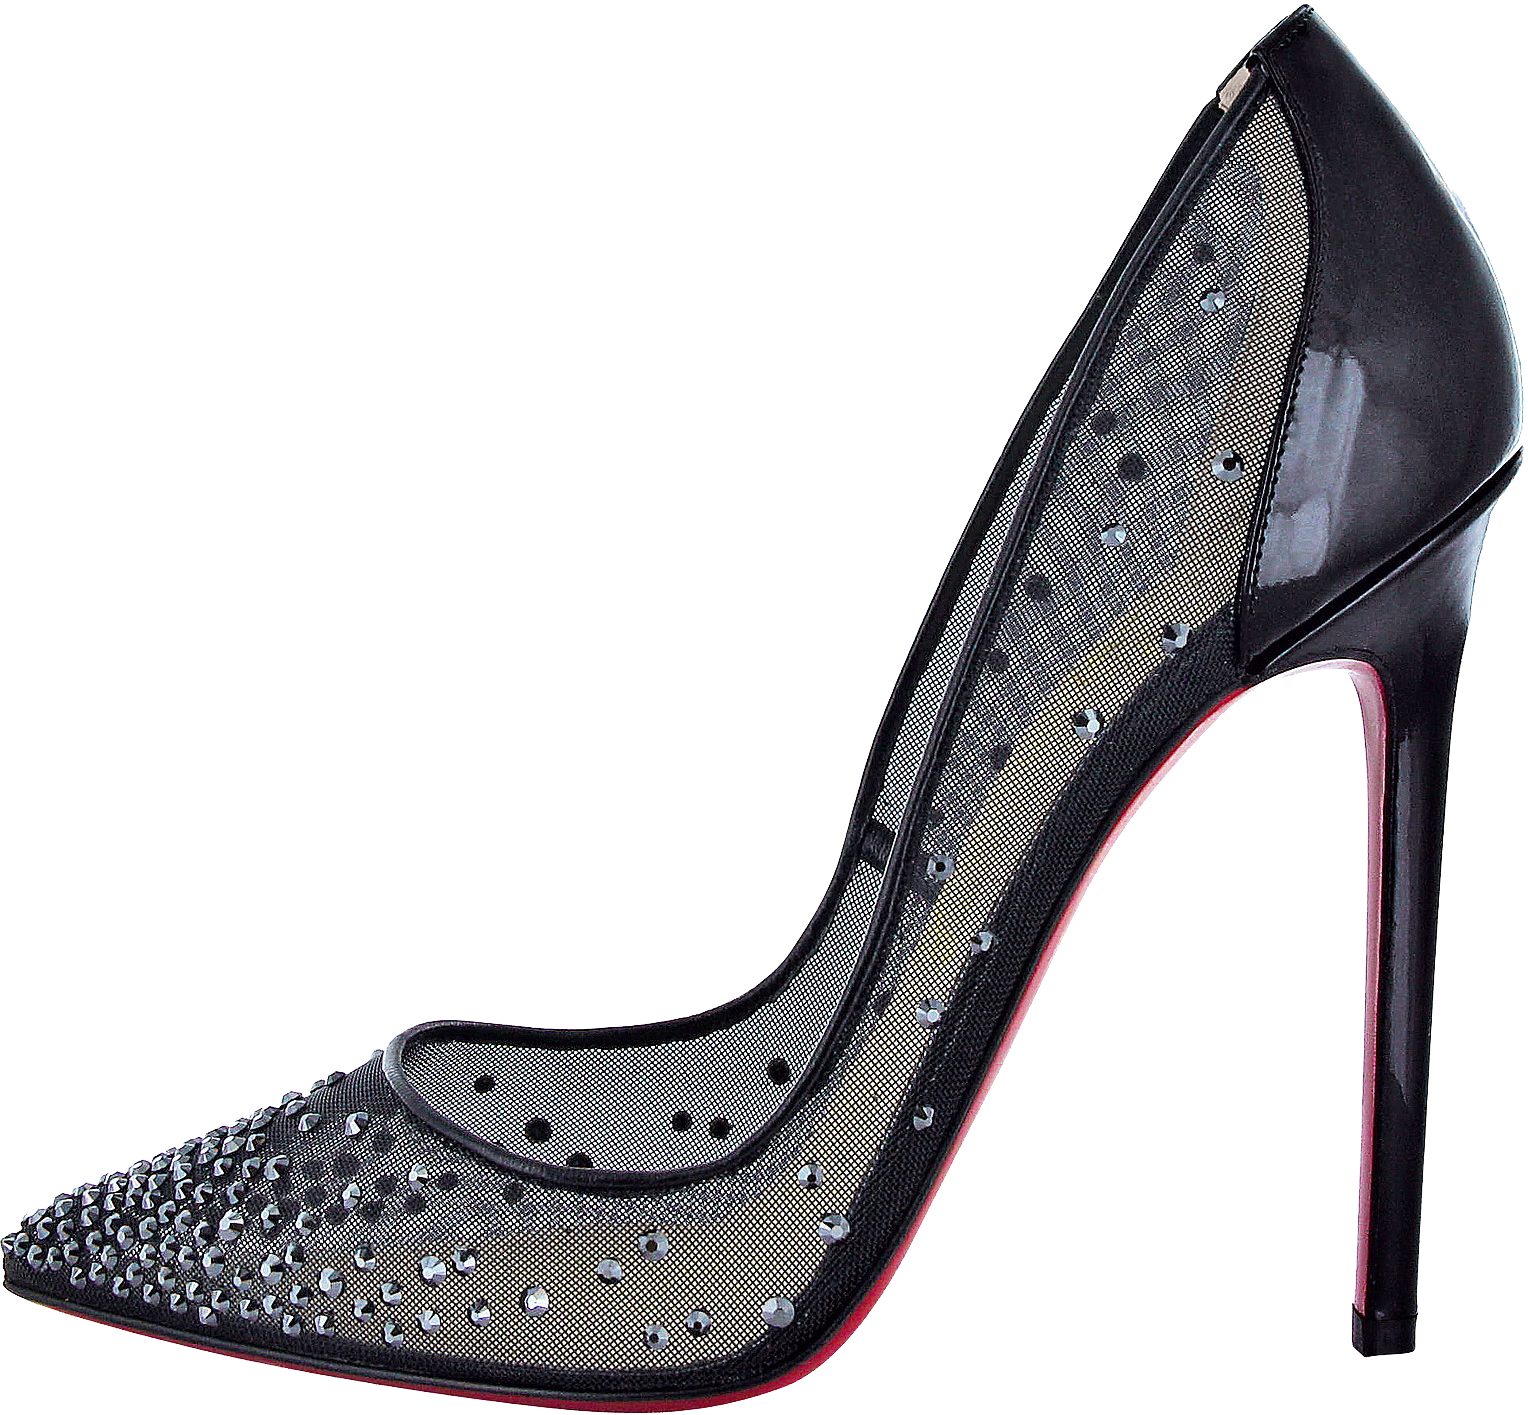 Louboutin PNG -bestand